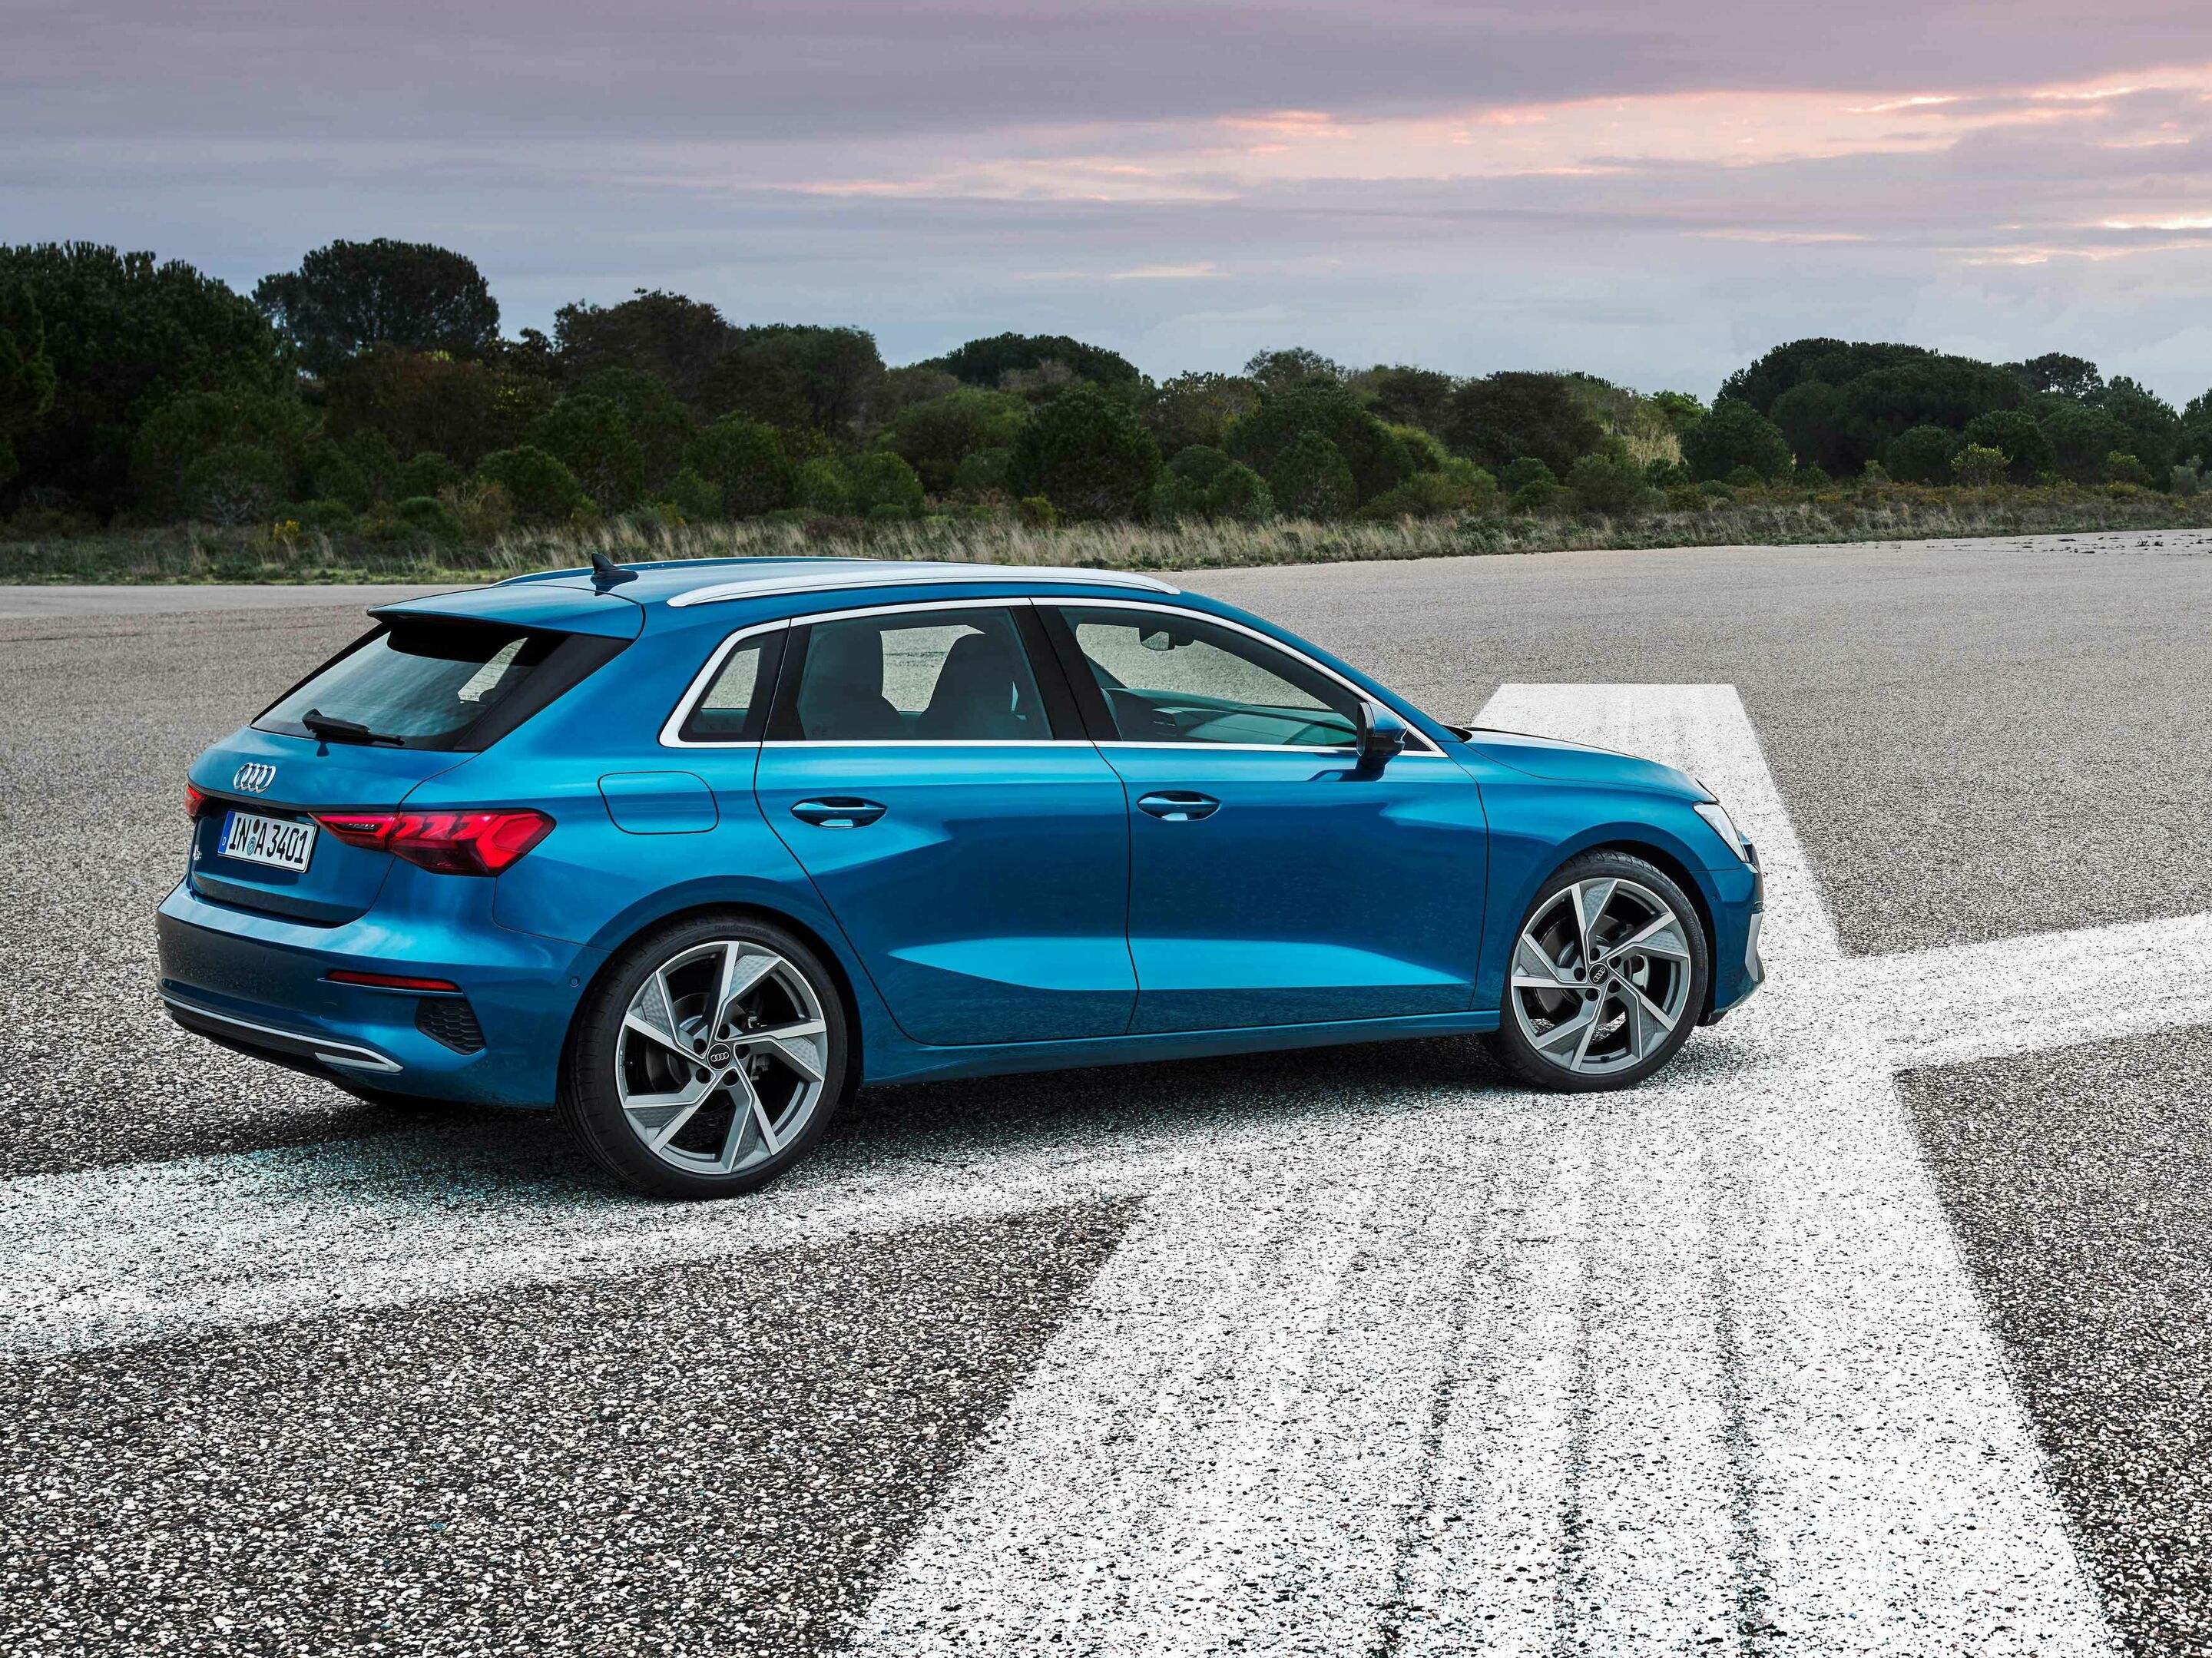 Audi is preparing its first purely digital worldwide market launch for the new A3 family